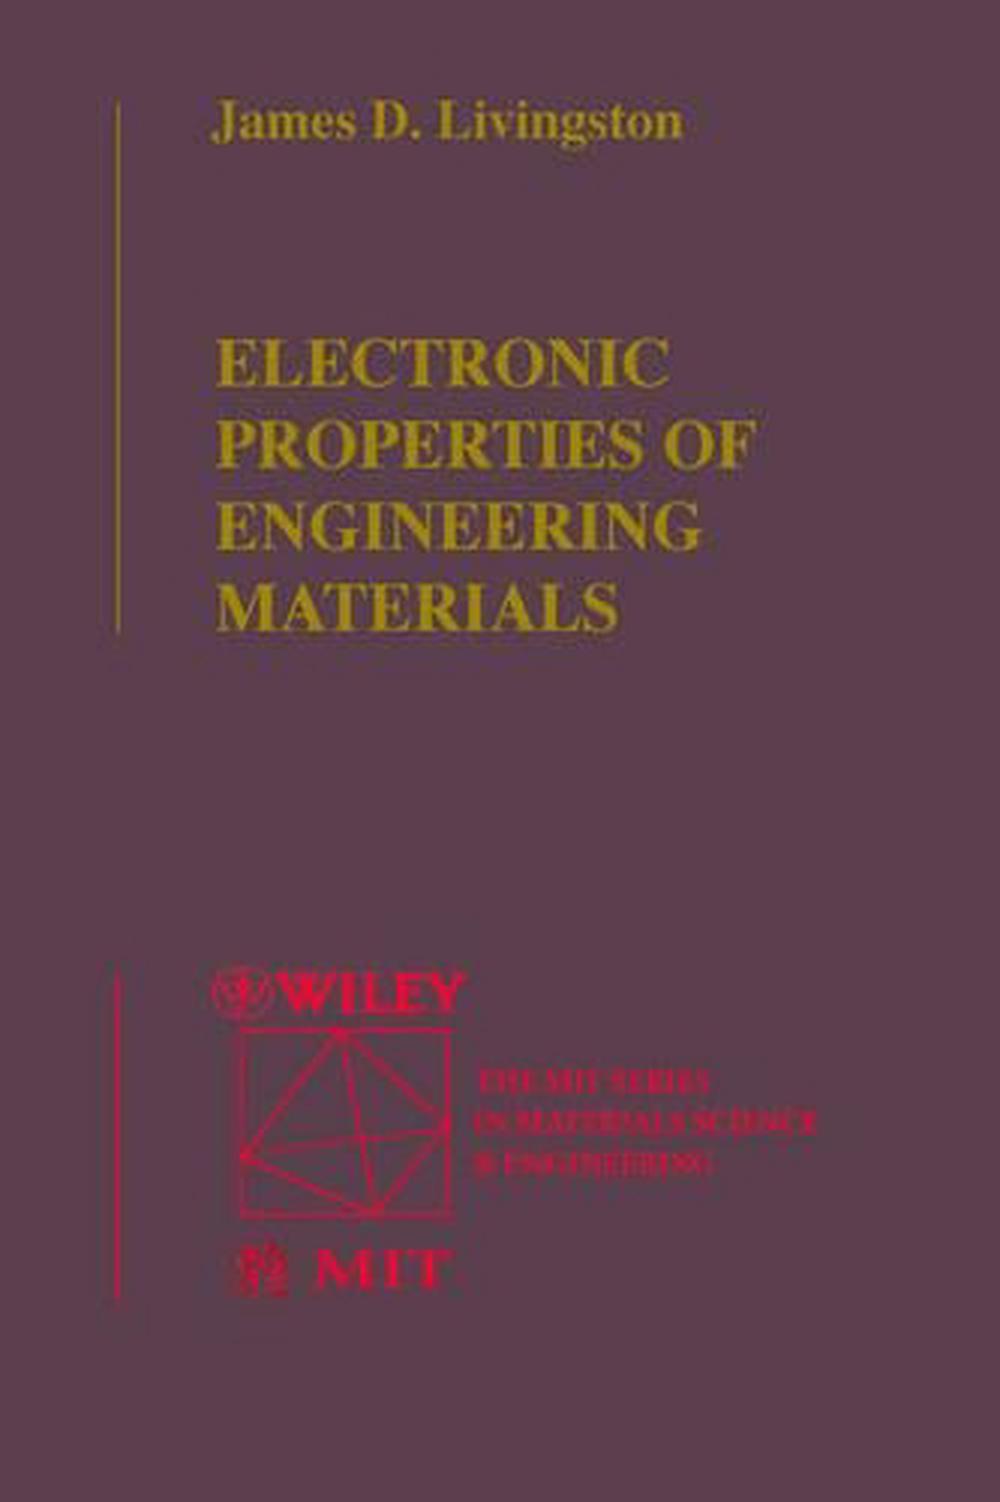 Electronic Properties of Engineering Materials by James D. Livingston (English) 9780471316275 eBay